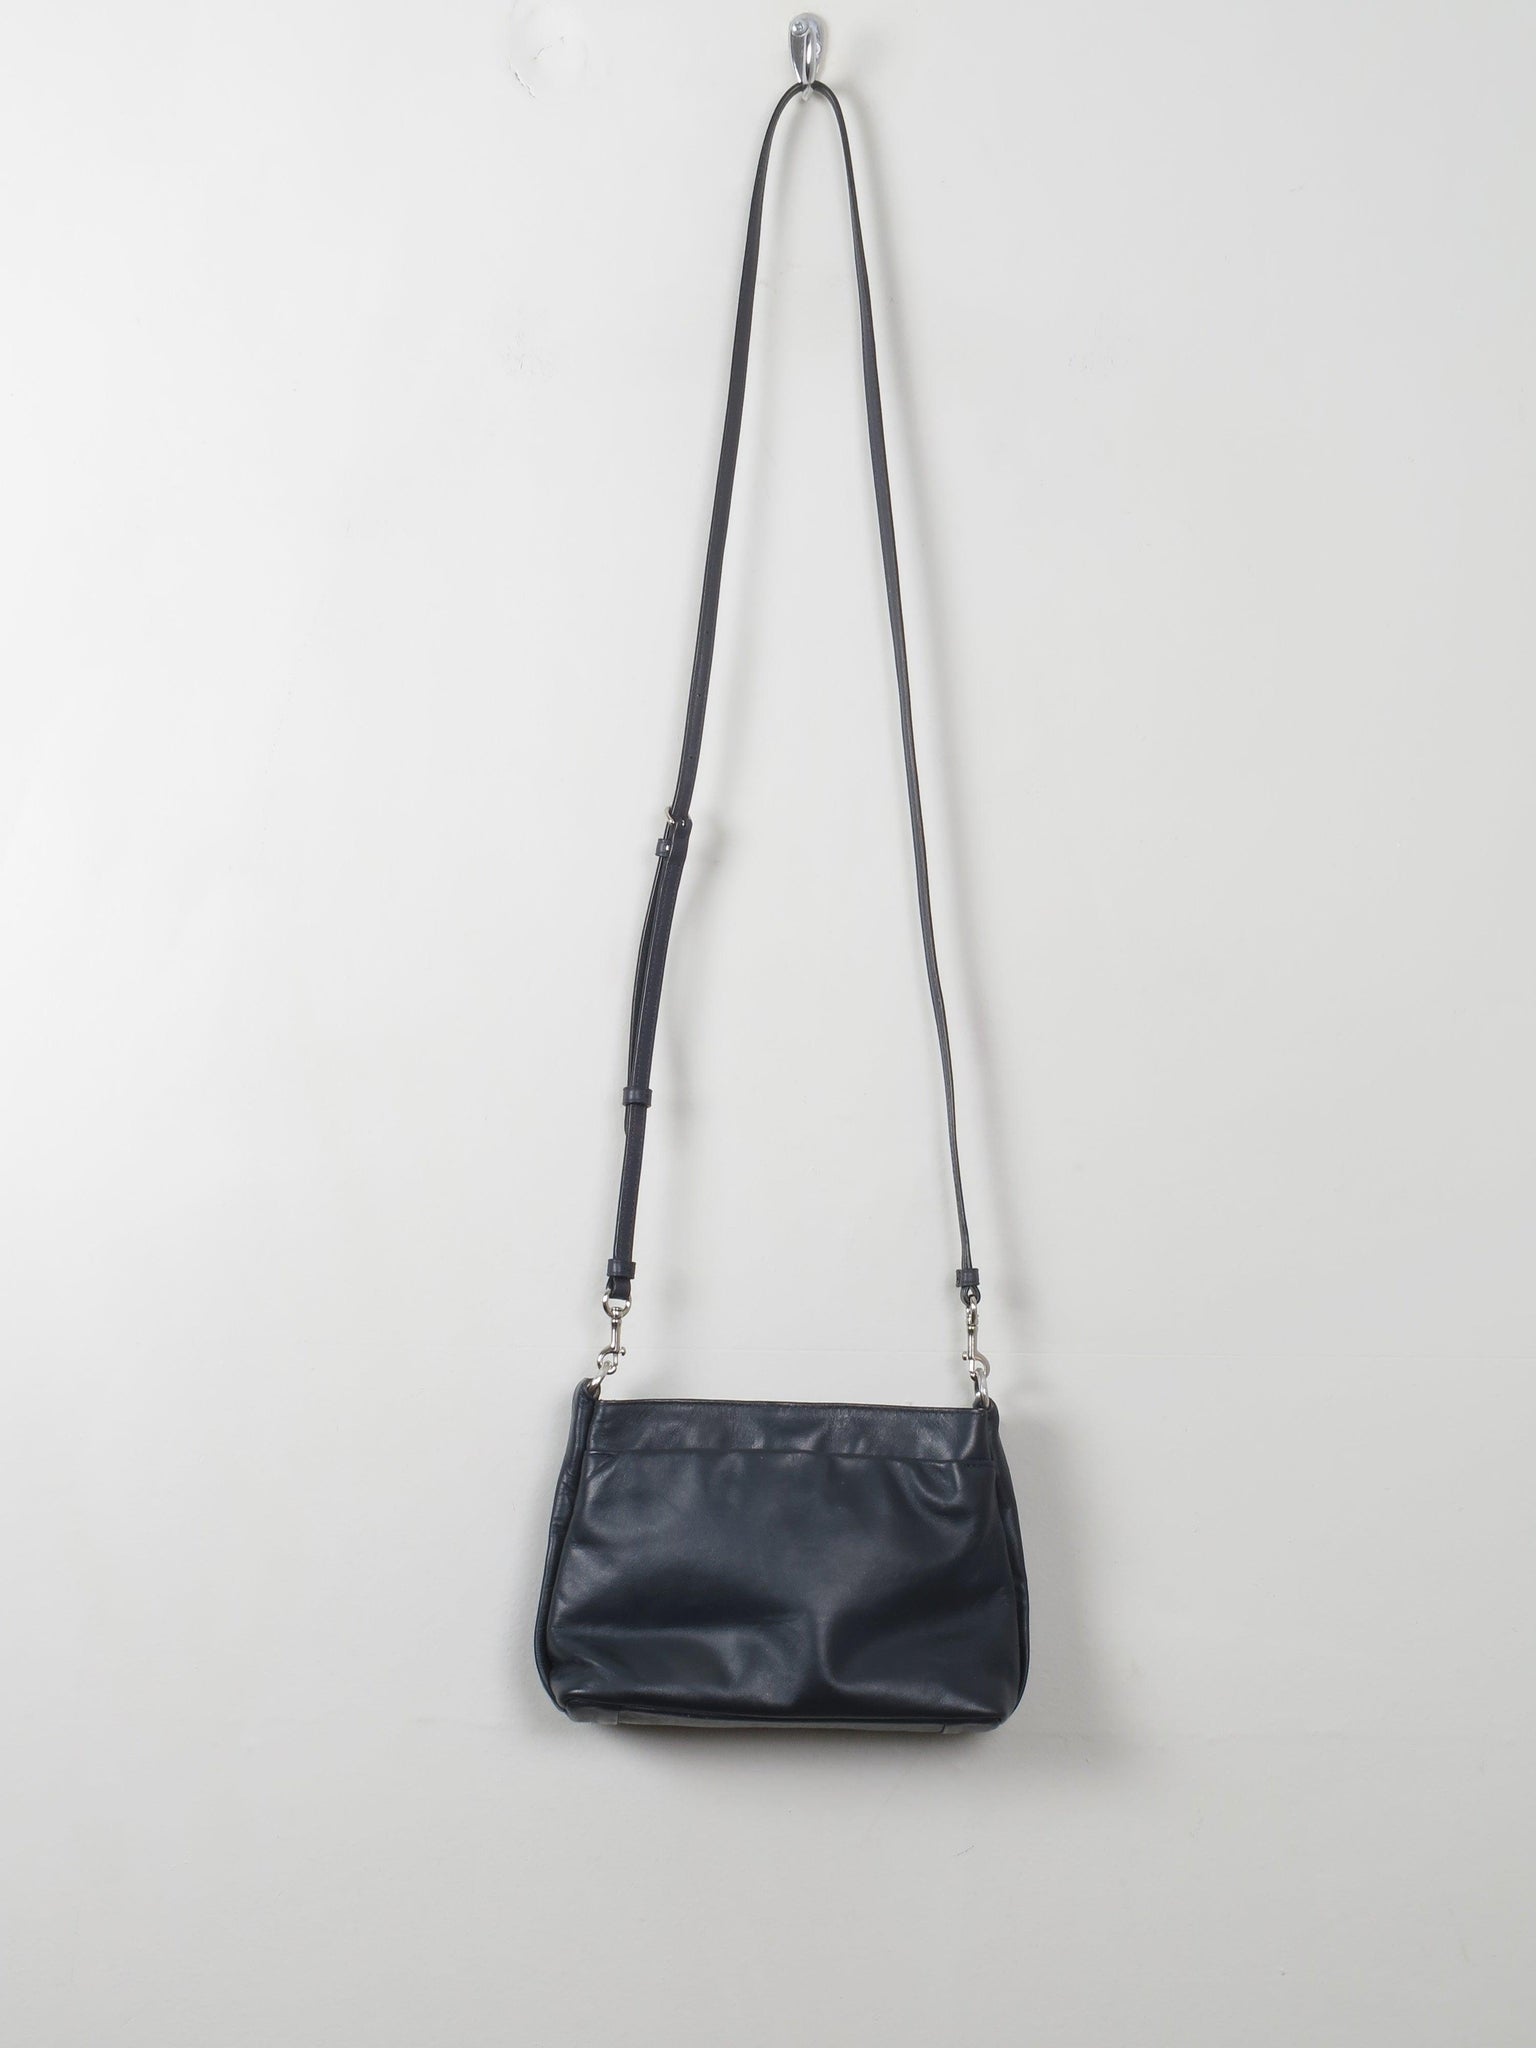 Navy Vintage Leather Cross Body Bag - The Harlequin